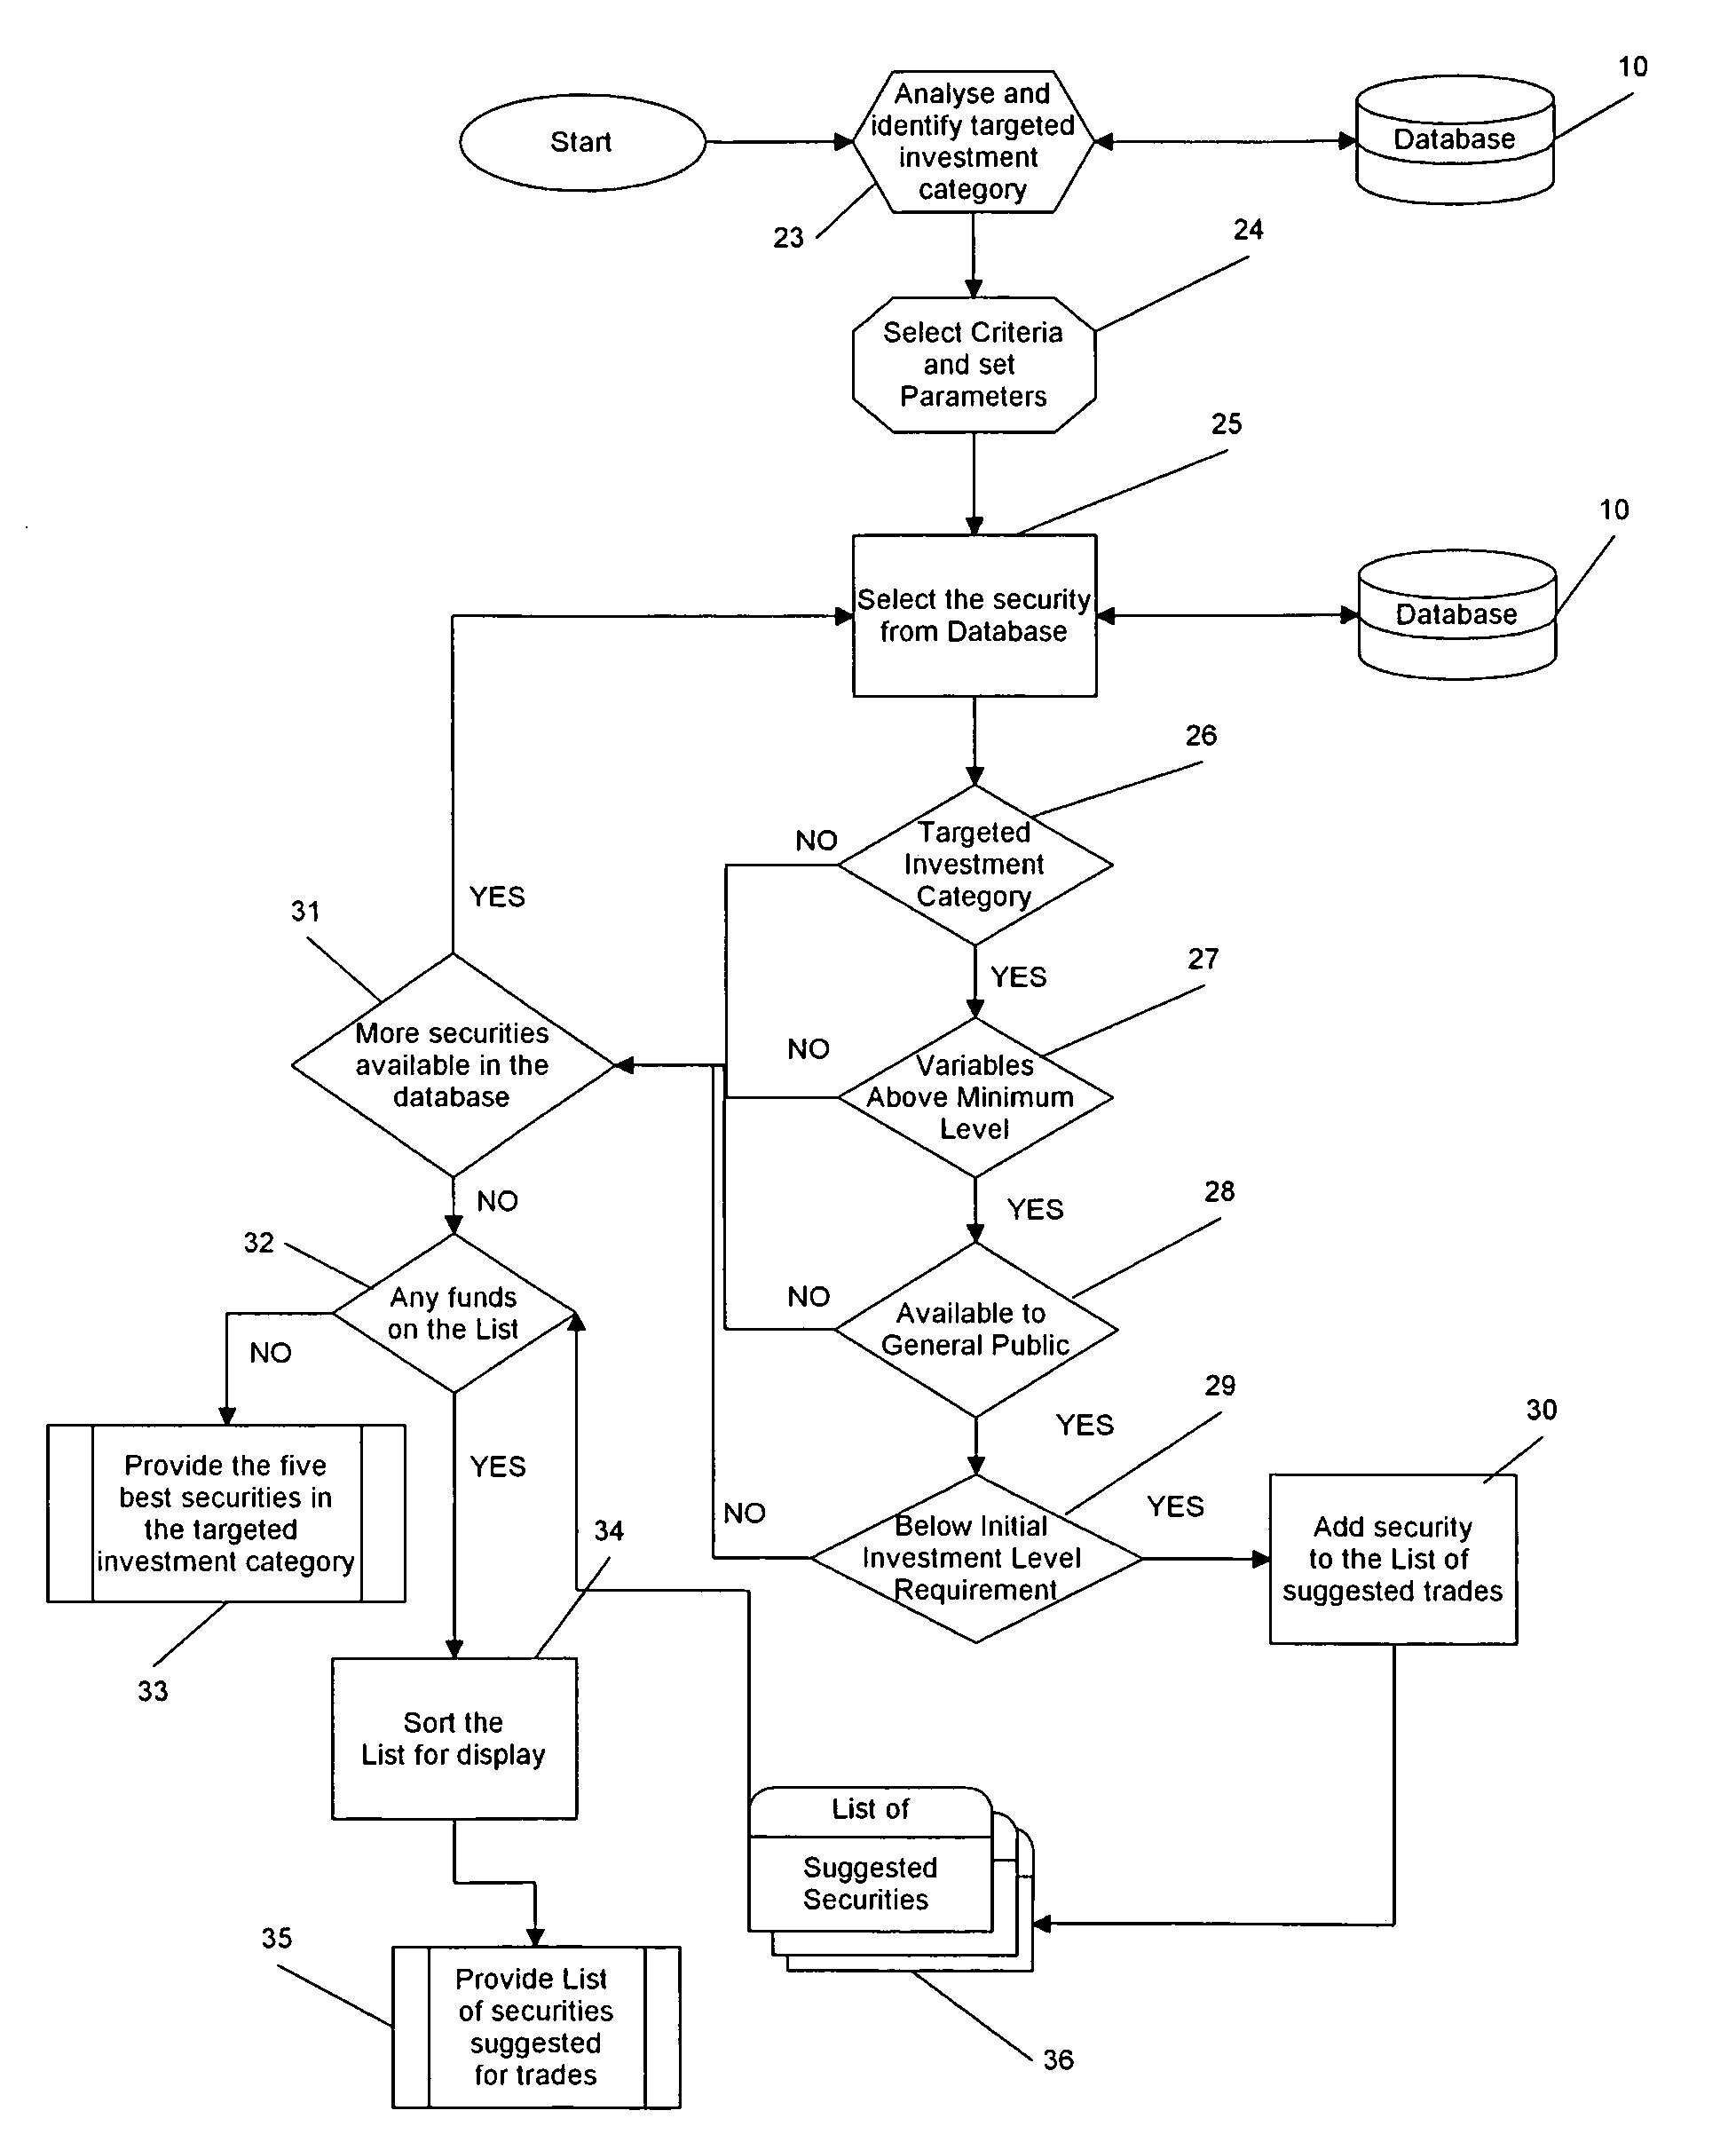 System and method to analyze current portfolio holdings for individuals and then provide automated potentially suitable trade suggestions by using database cross-referencing, websites and internet